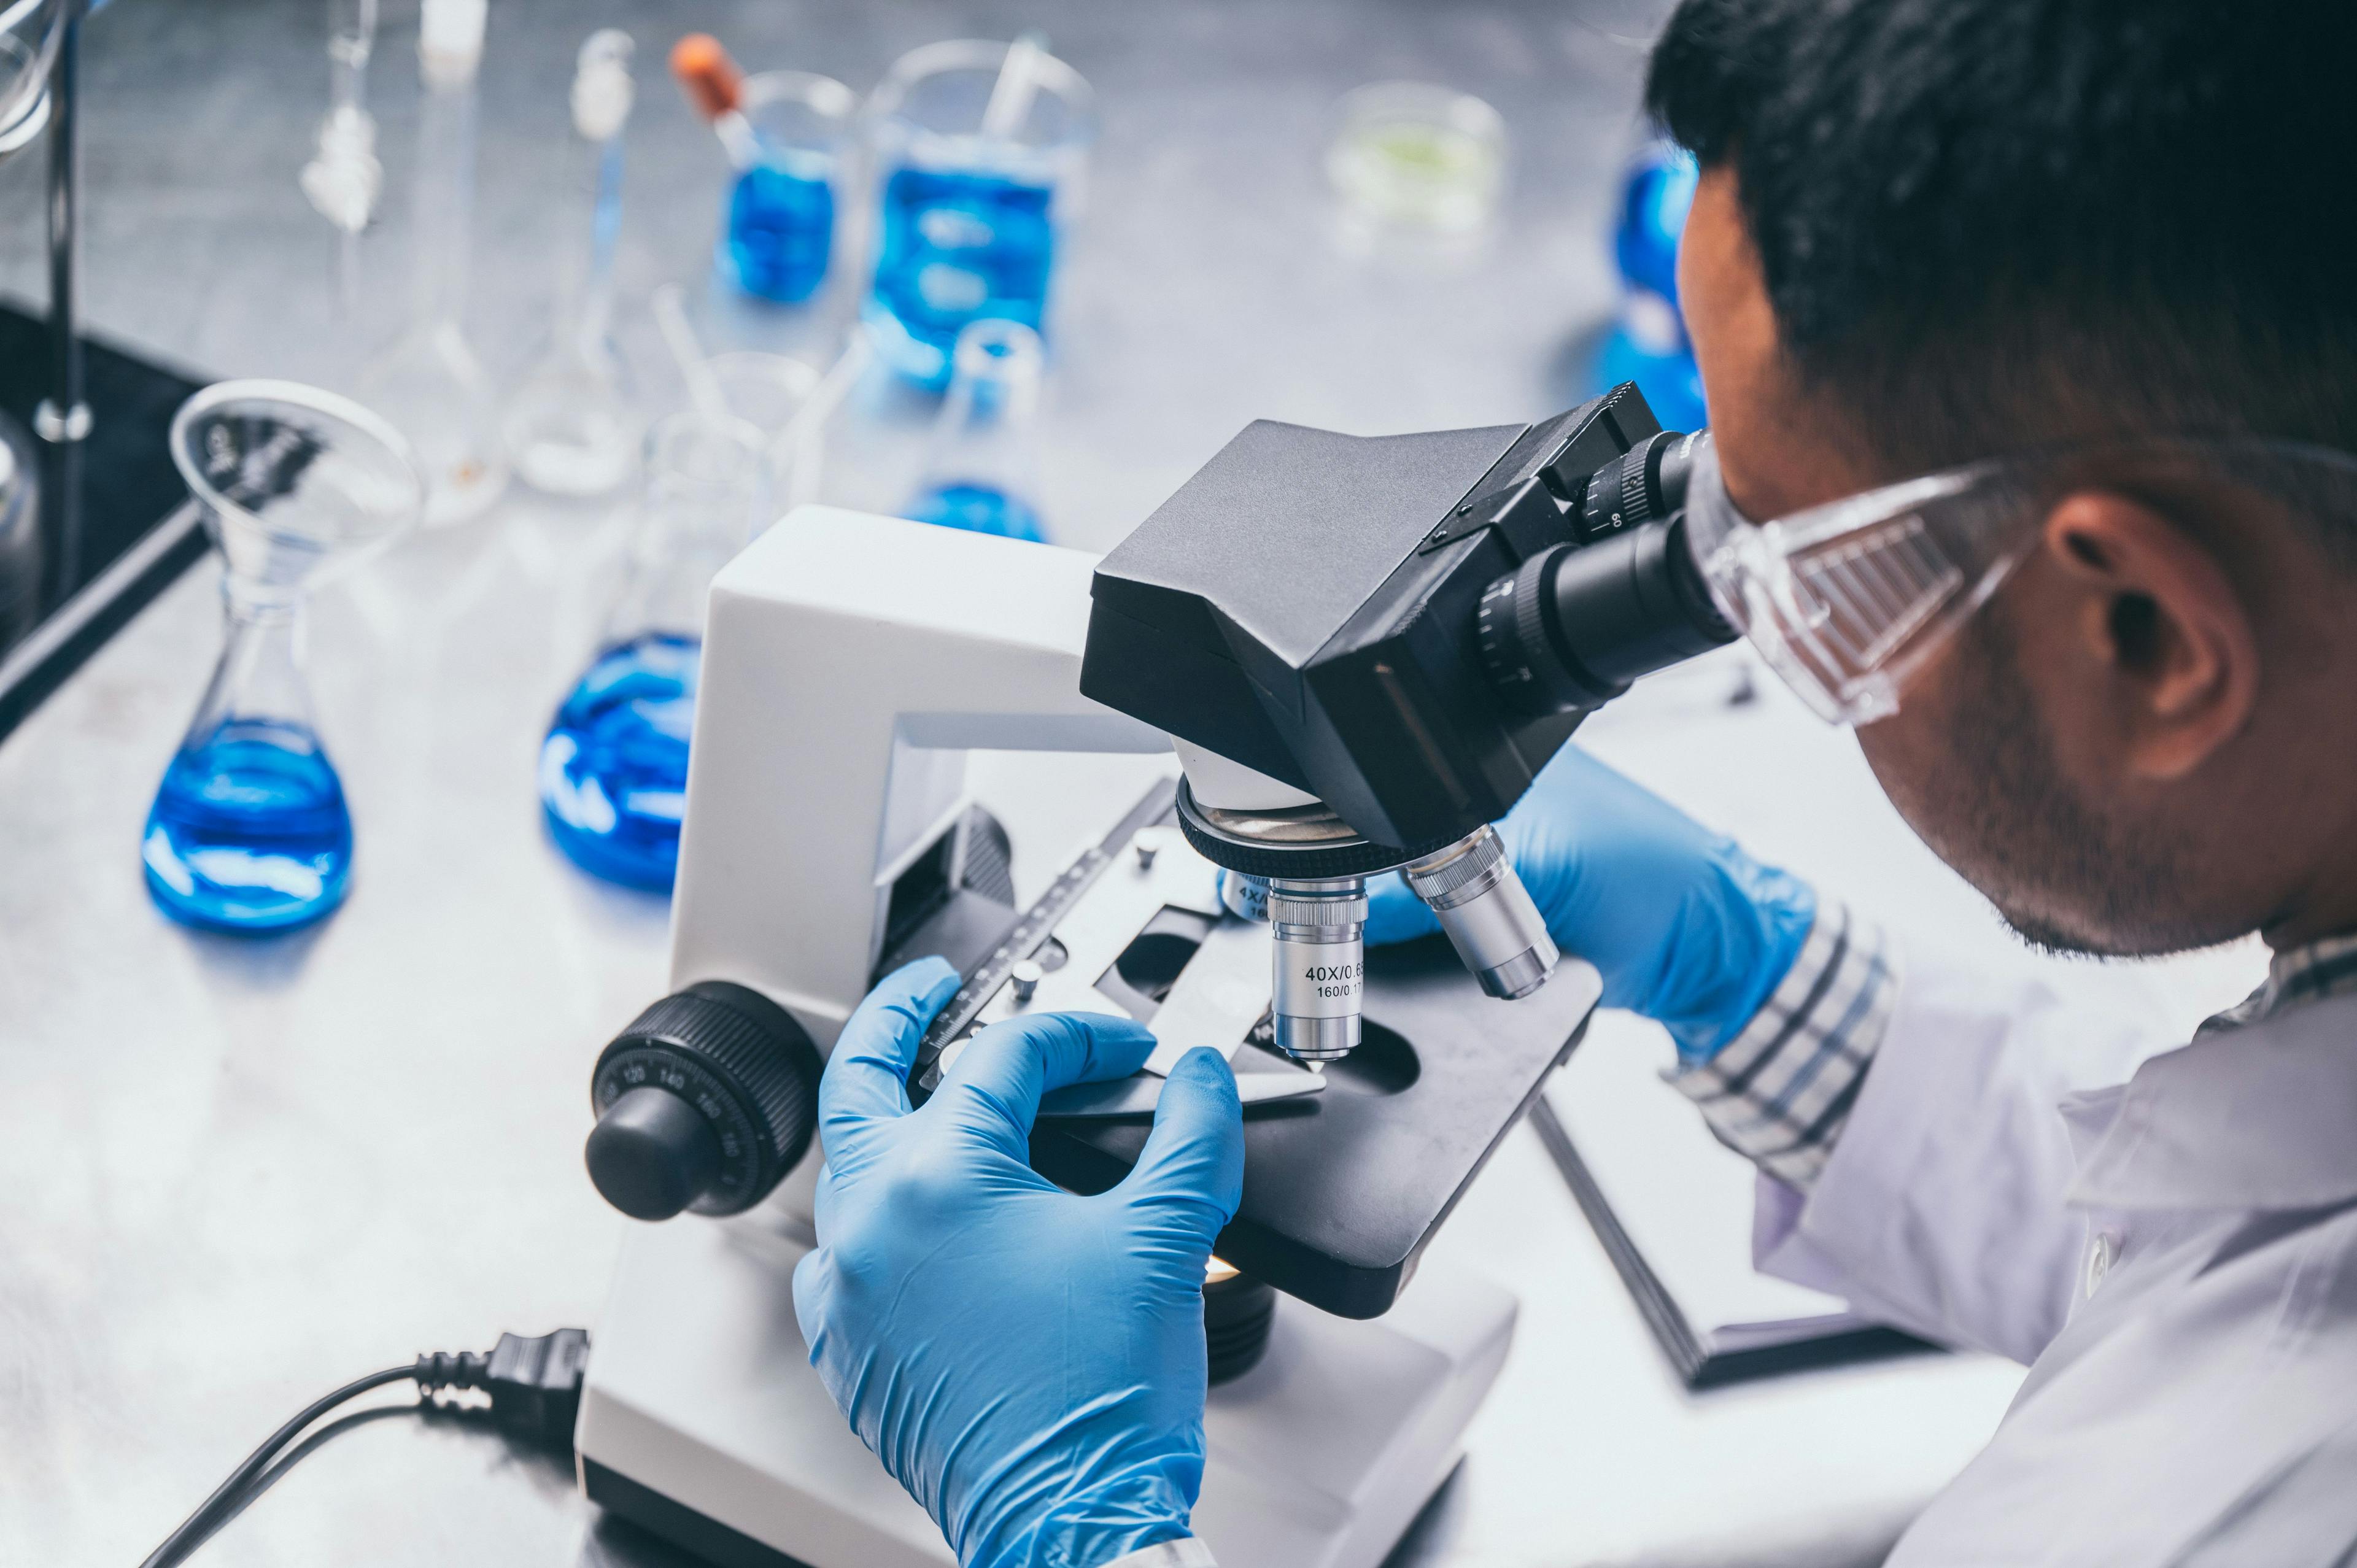 A team of scientists at the Celanese Development & Feasibility Lab will independently conduct portions of the planned research in this dedicated pharmaceutical facility. (Adobe Stock image)